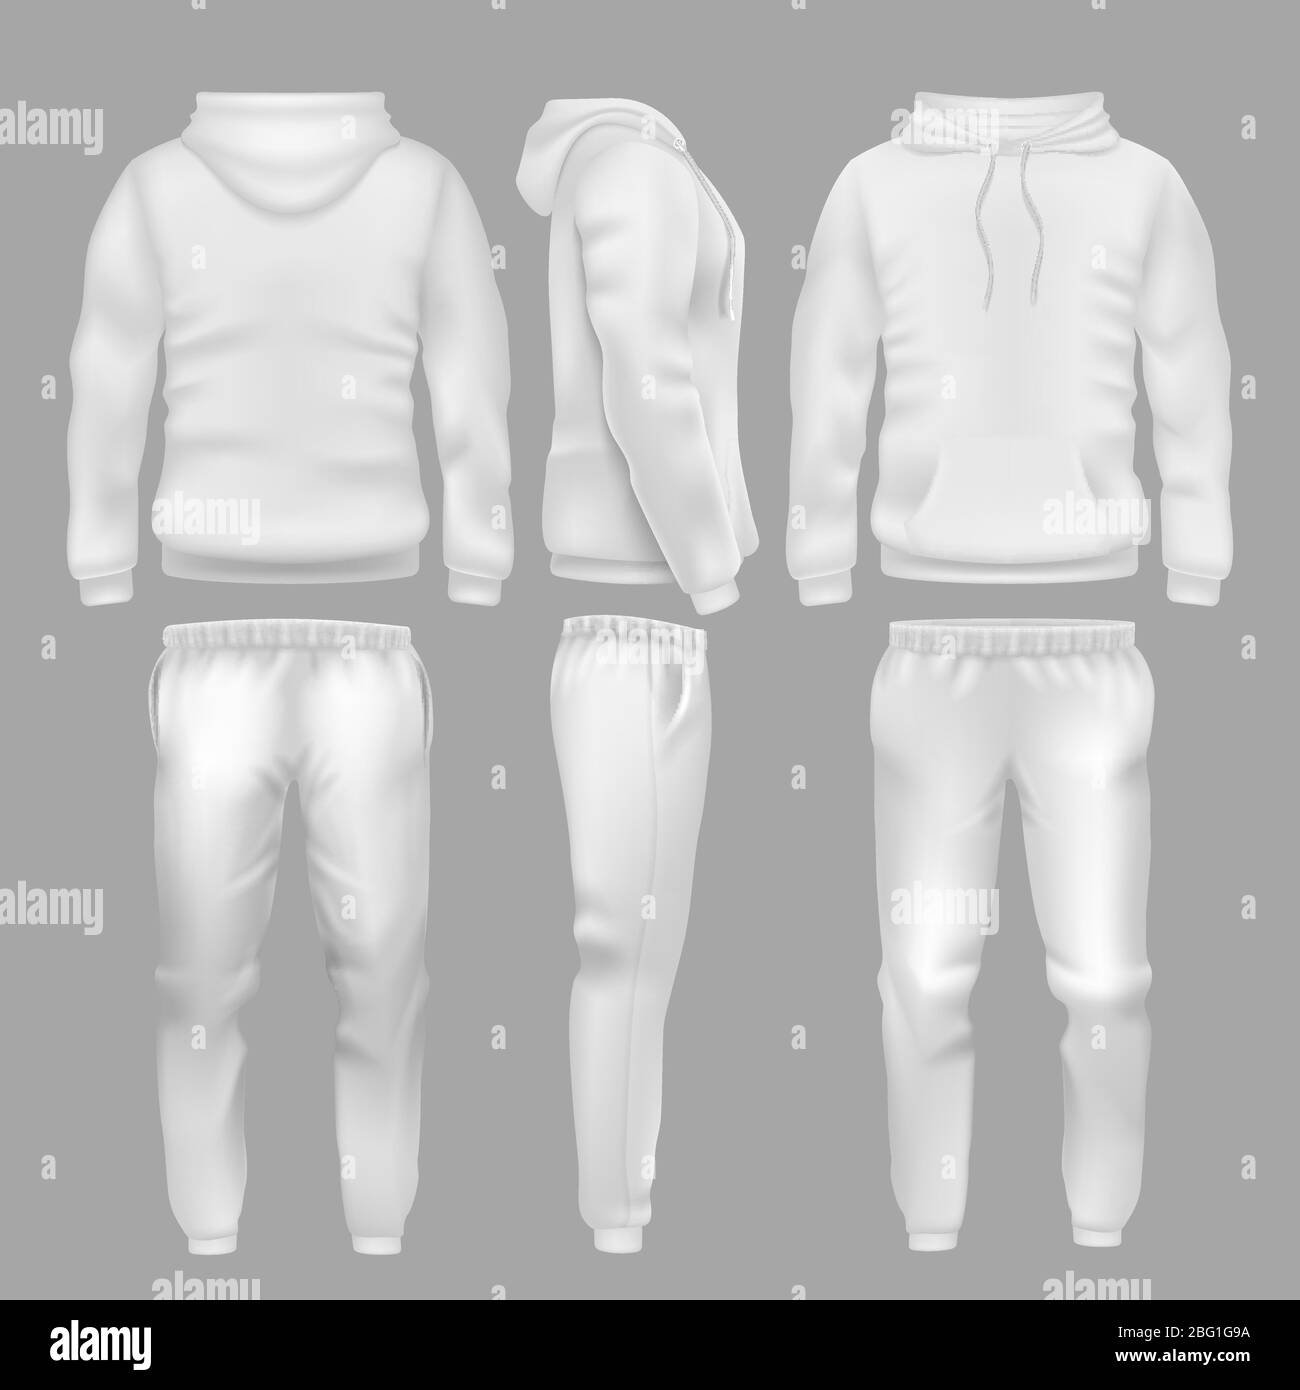 White hooded sweatshirt with sports trousers. Active sport wear hoodie and pants vector templates. Sportswear sweatshirt hoodie and urban pants illust Stock Vector